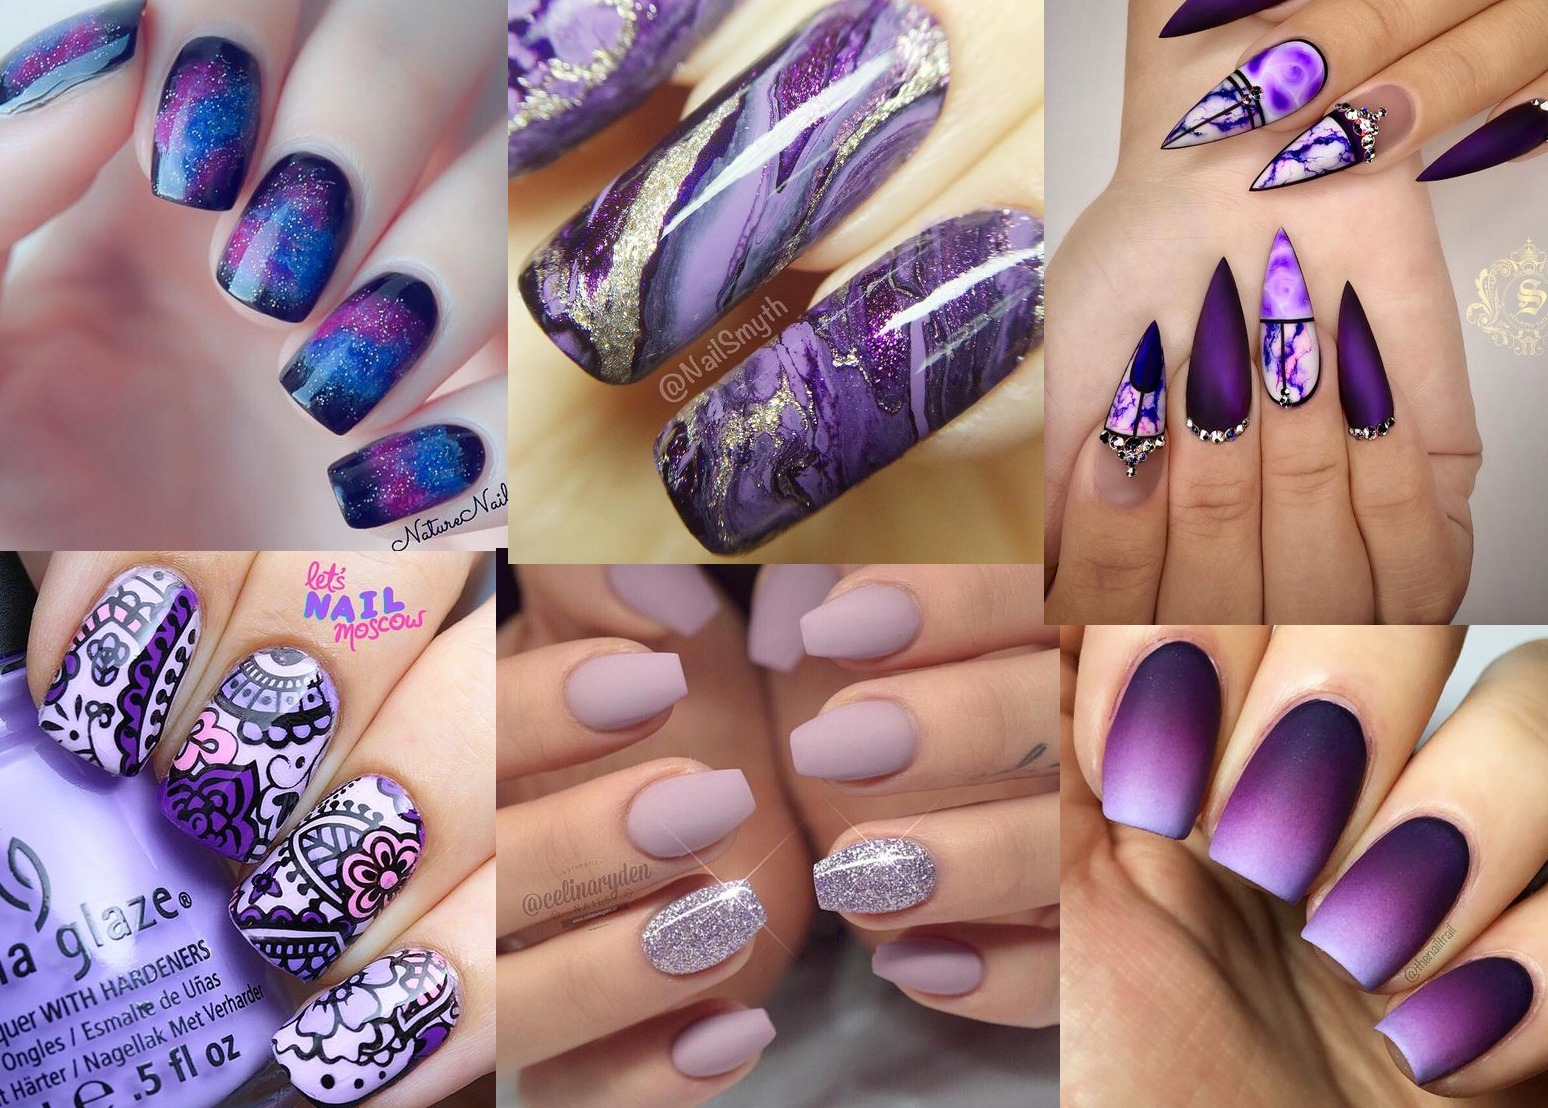 7. 10 Elegant Purple French Tip Nail Designs for Short Nails - wide 6